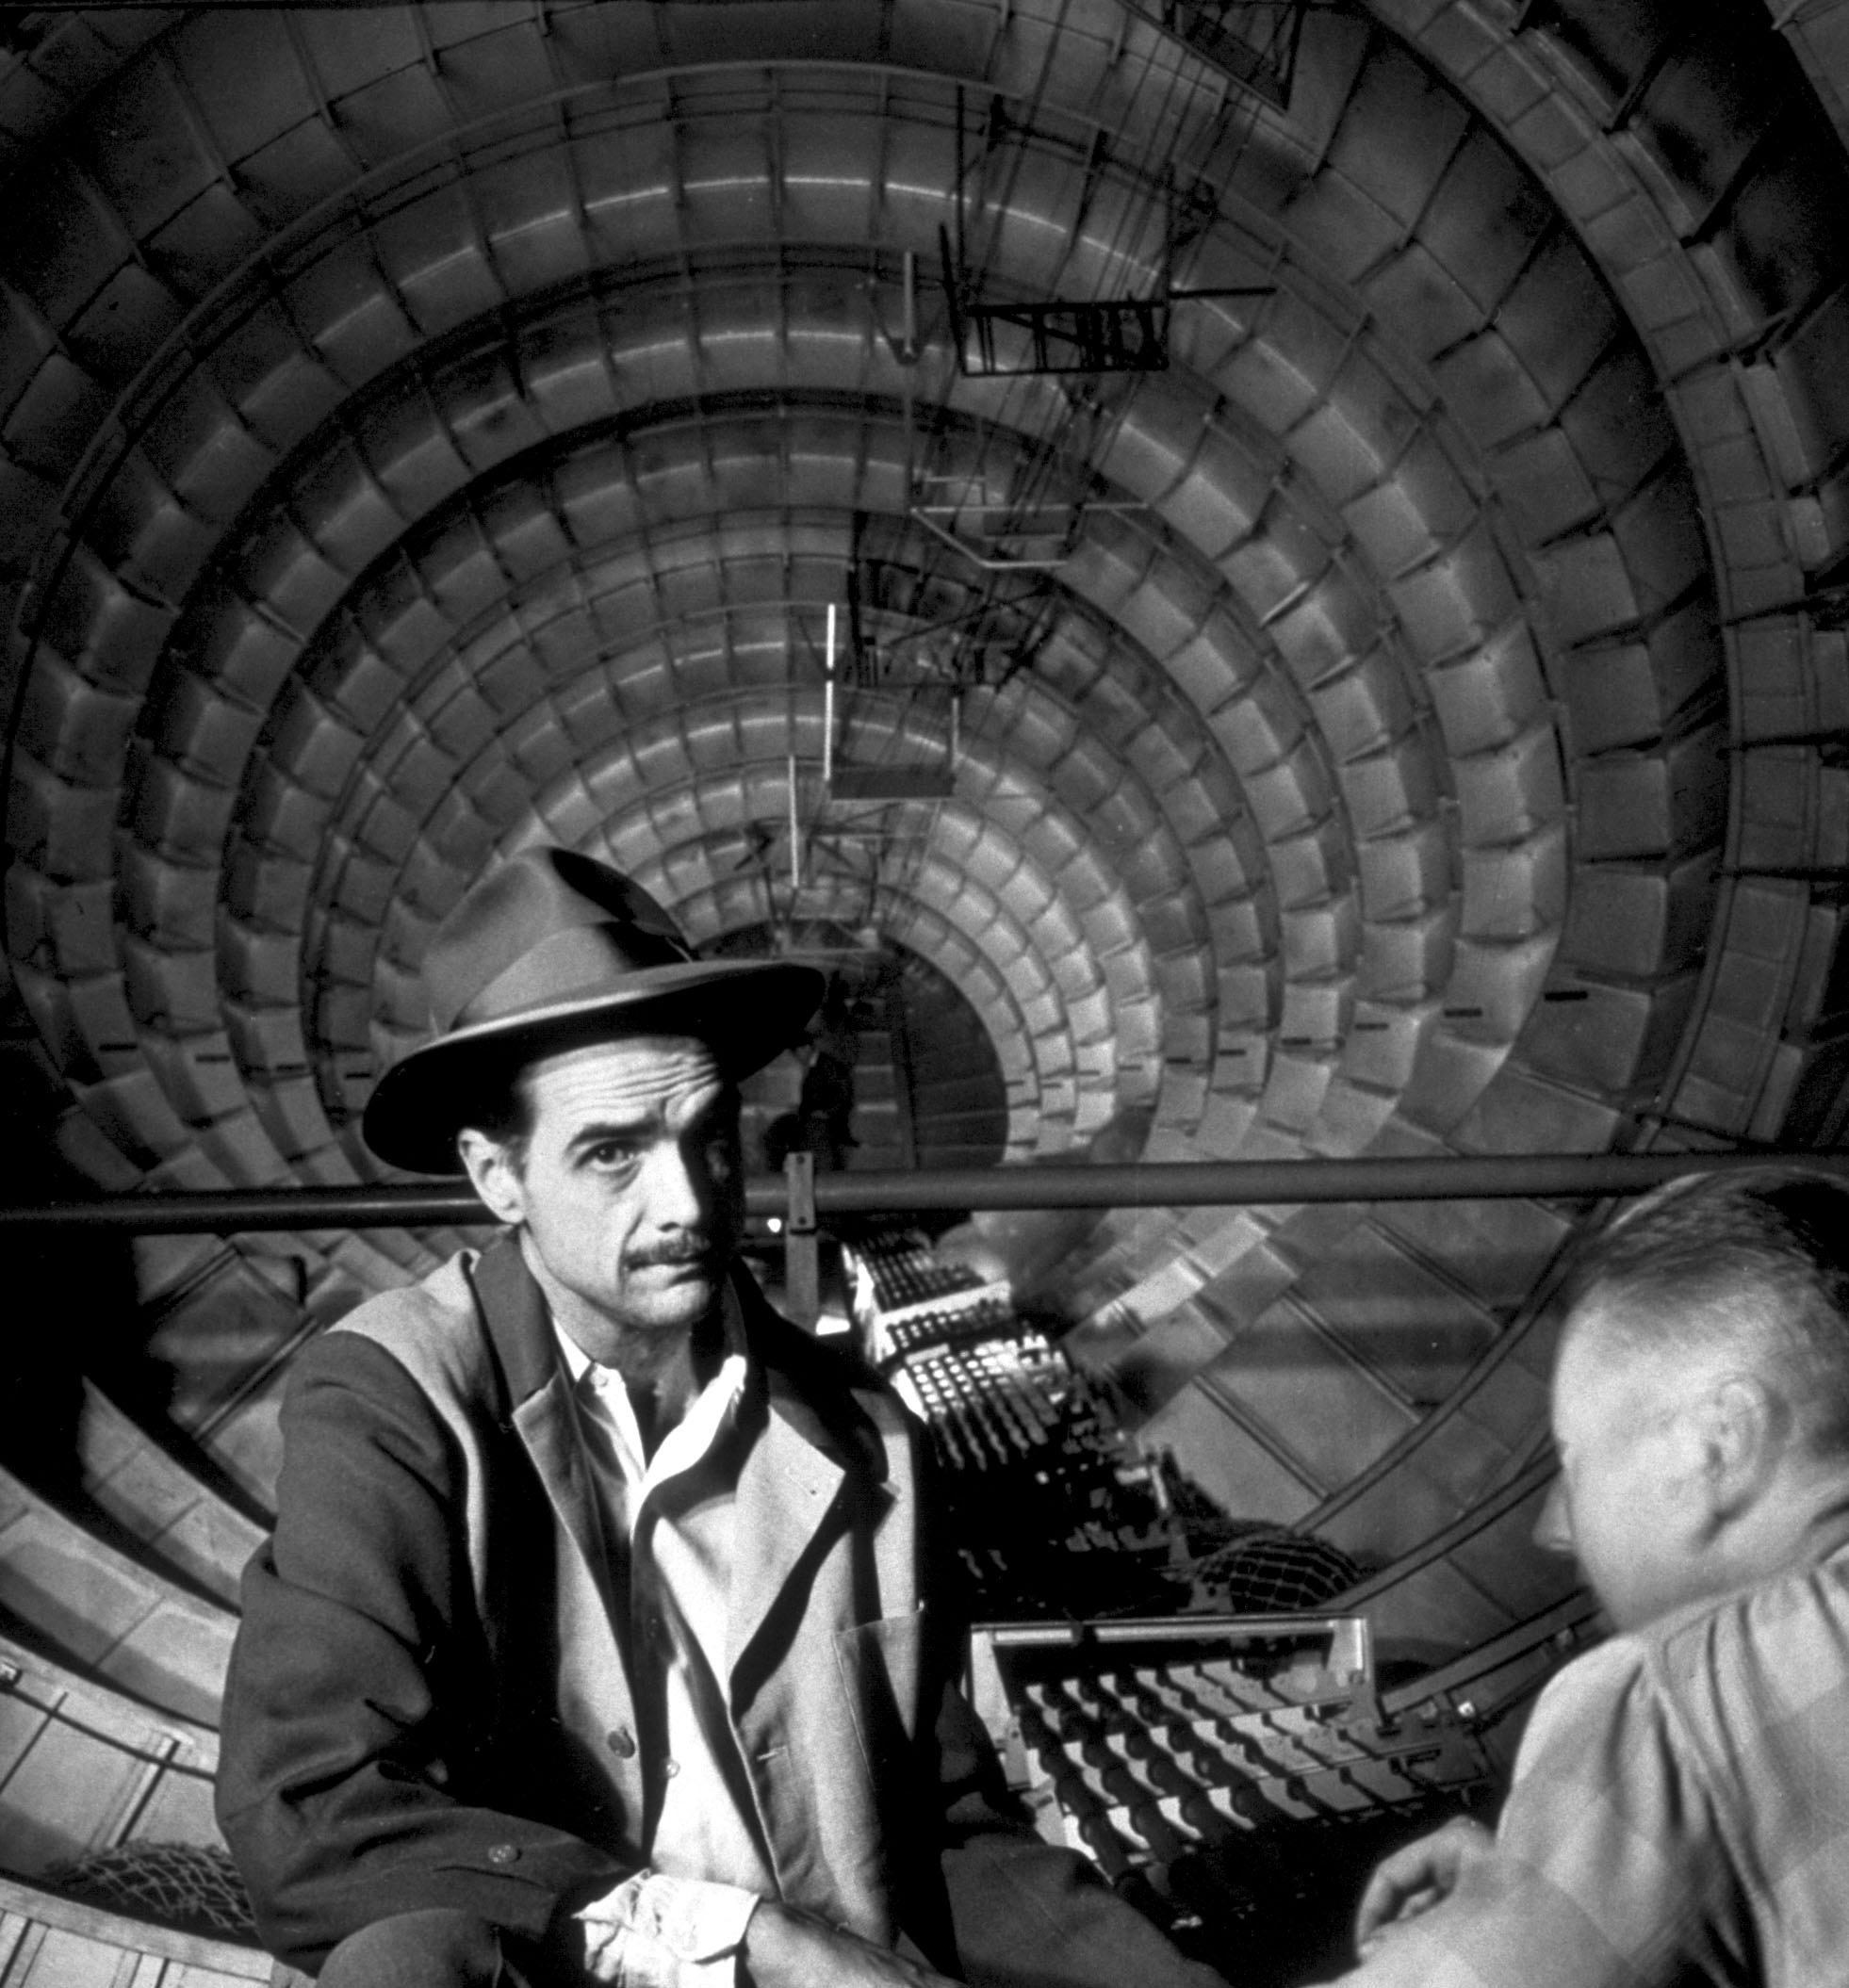 The industrialist, aviator, and film producer Howard Hughes sits with an engineer inside the cavernous sea plane, "the Spruce Goose," in Los Angeles on November 6, 1947.